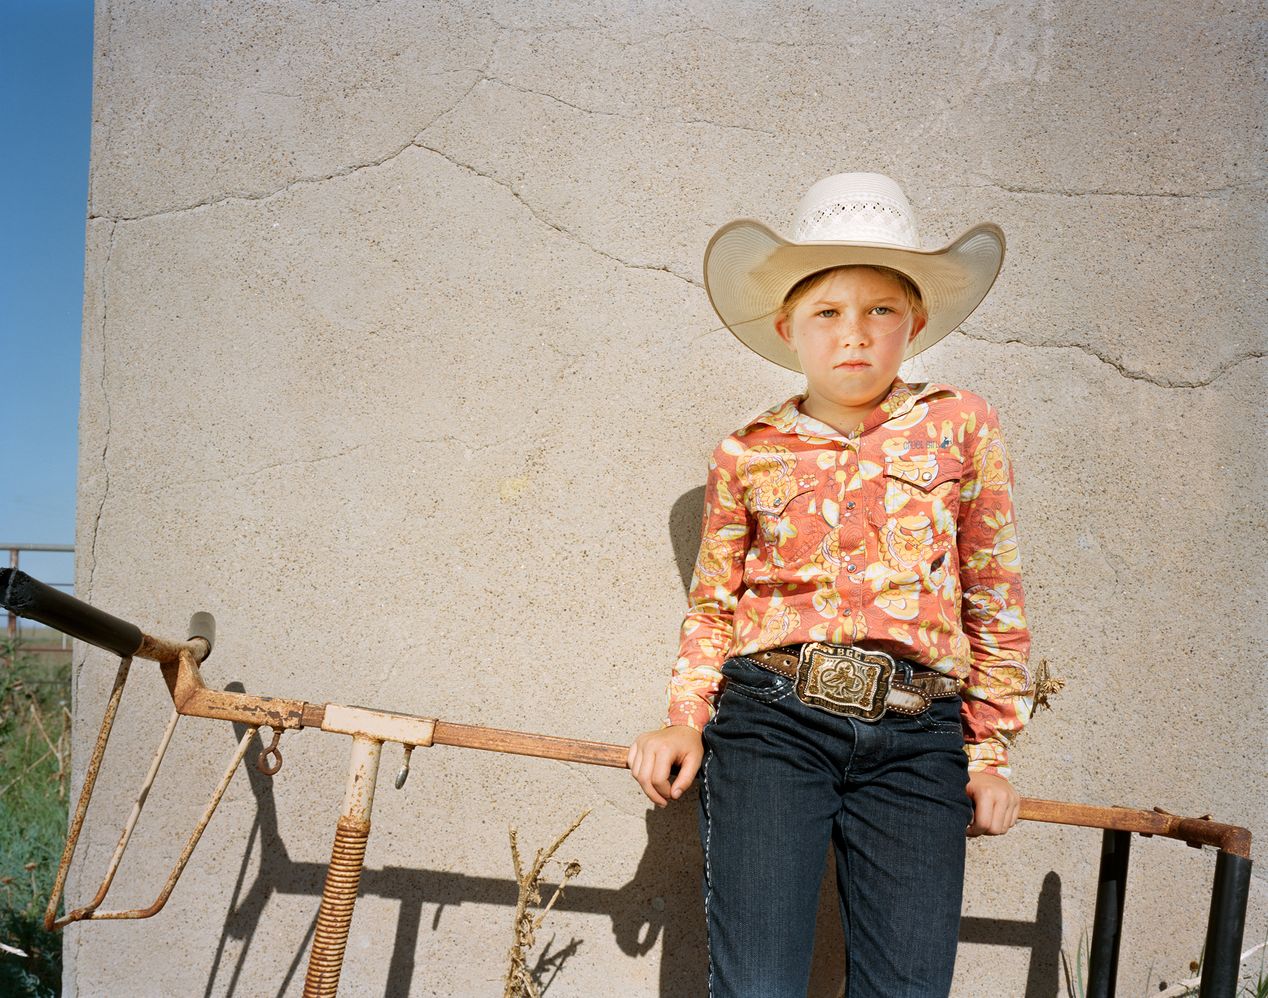 Young cowgirl leaning against a practice bull, environmental portrait photography, Ilona Szwarc, contemporary Los Angeles artist.